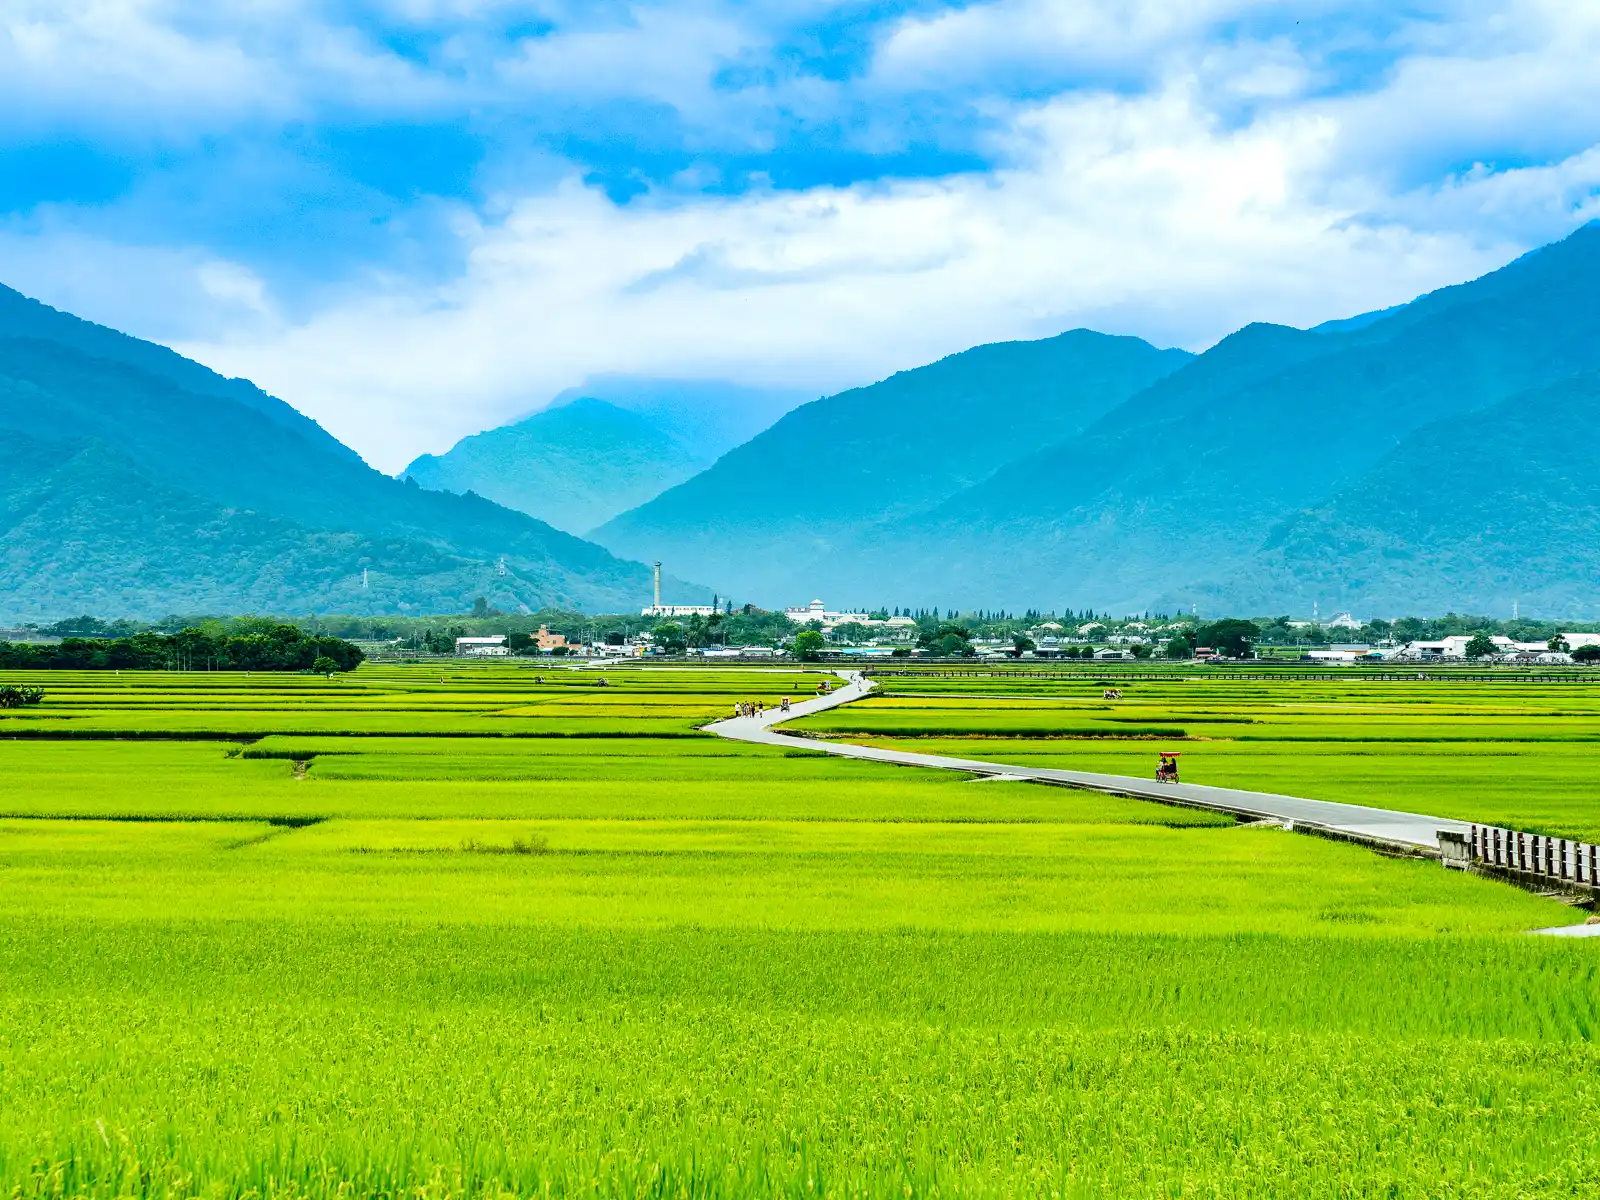 Beneath a row of mountains, a road gently winds through blooming fields of rice.